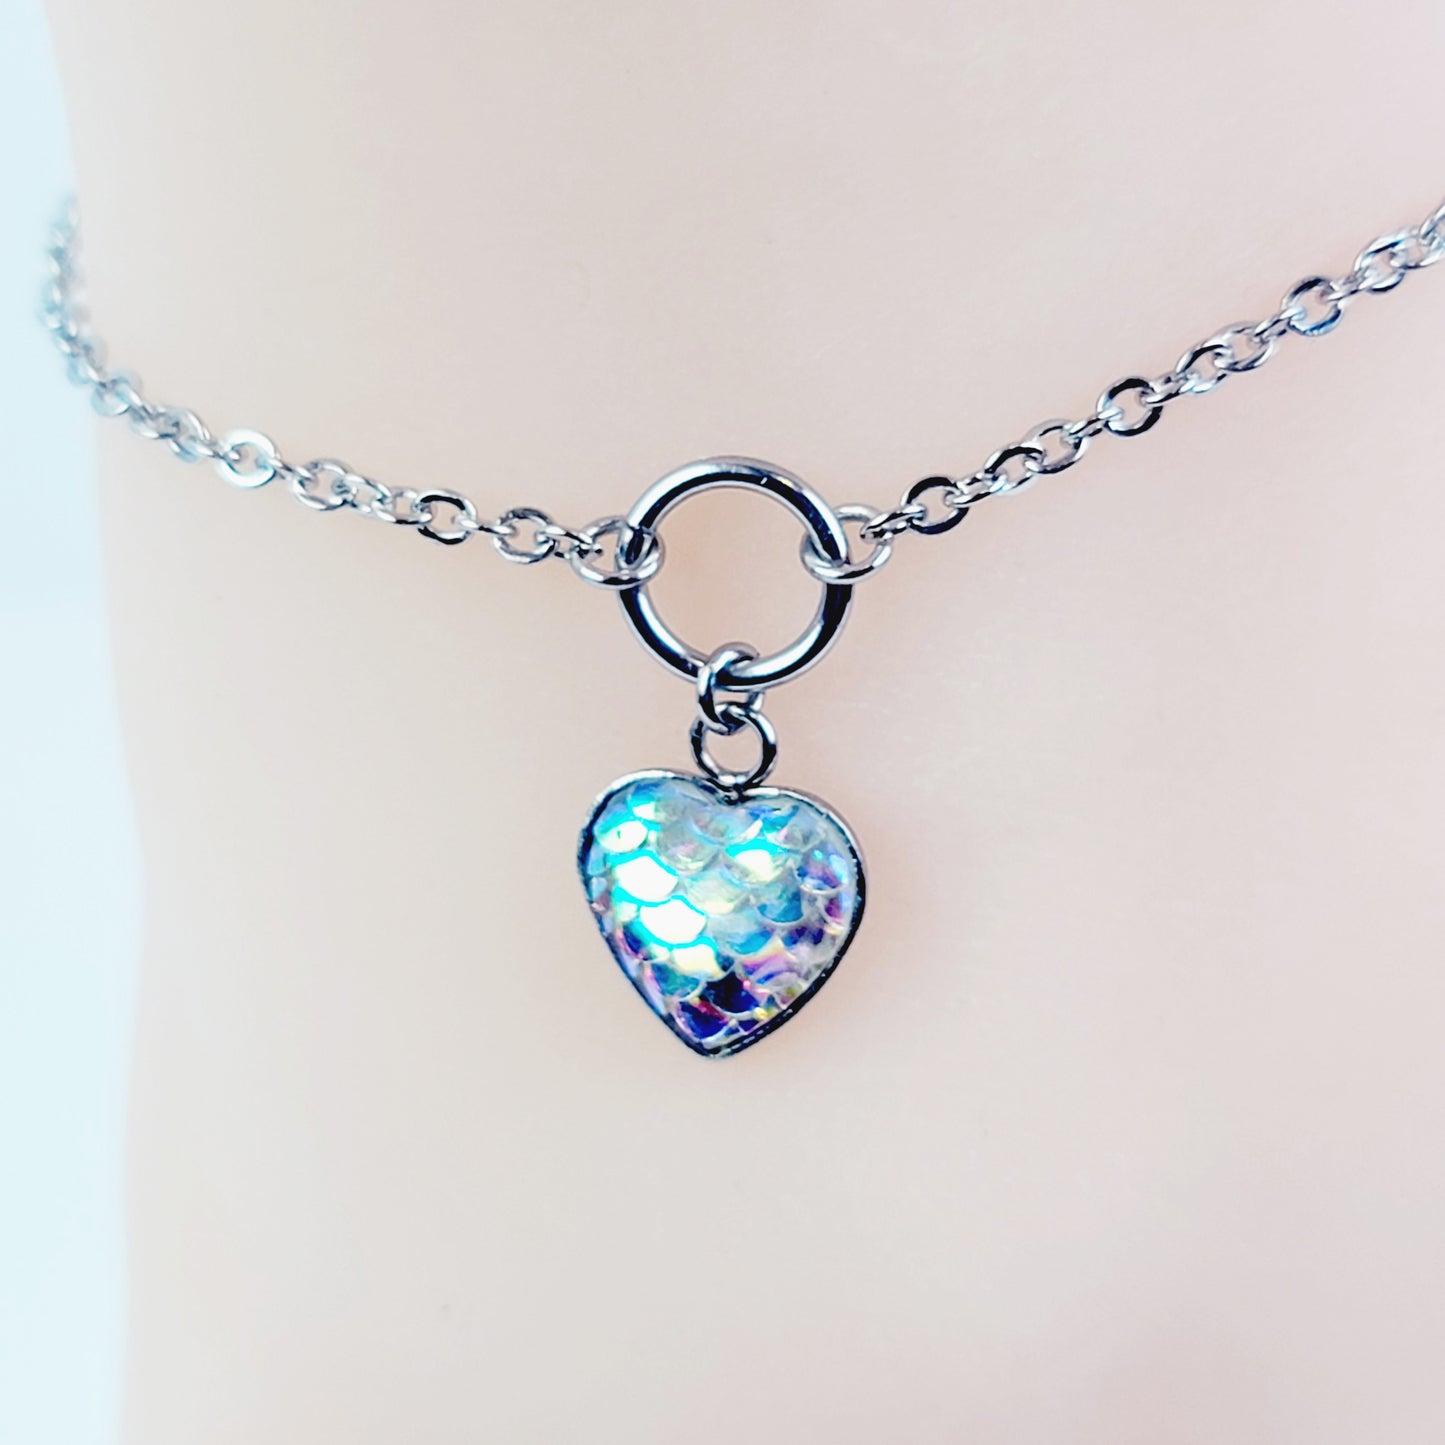 Circle of O Anklet with Mermaid/Dragon Scale Heart. 100%